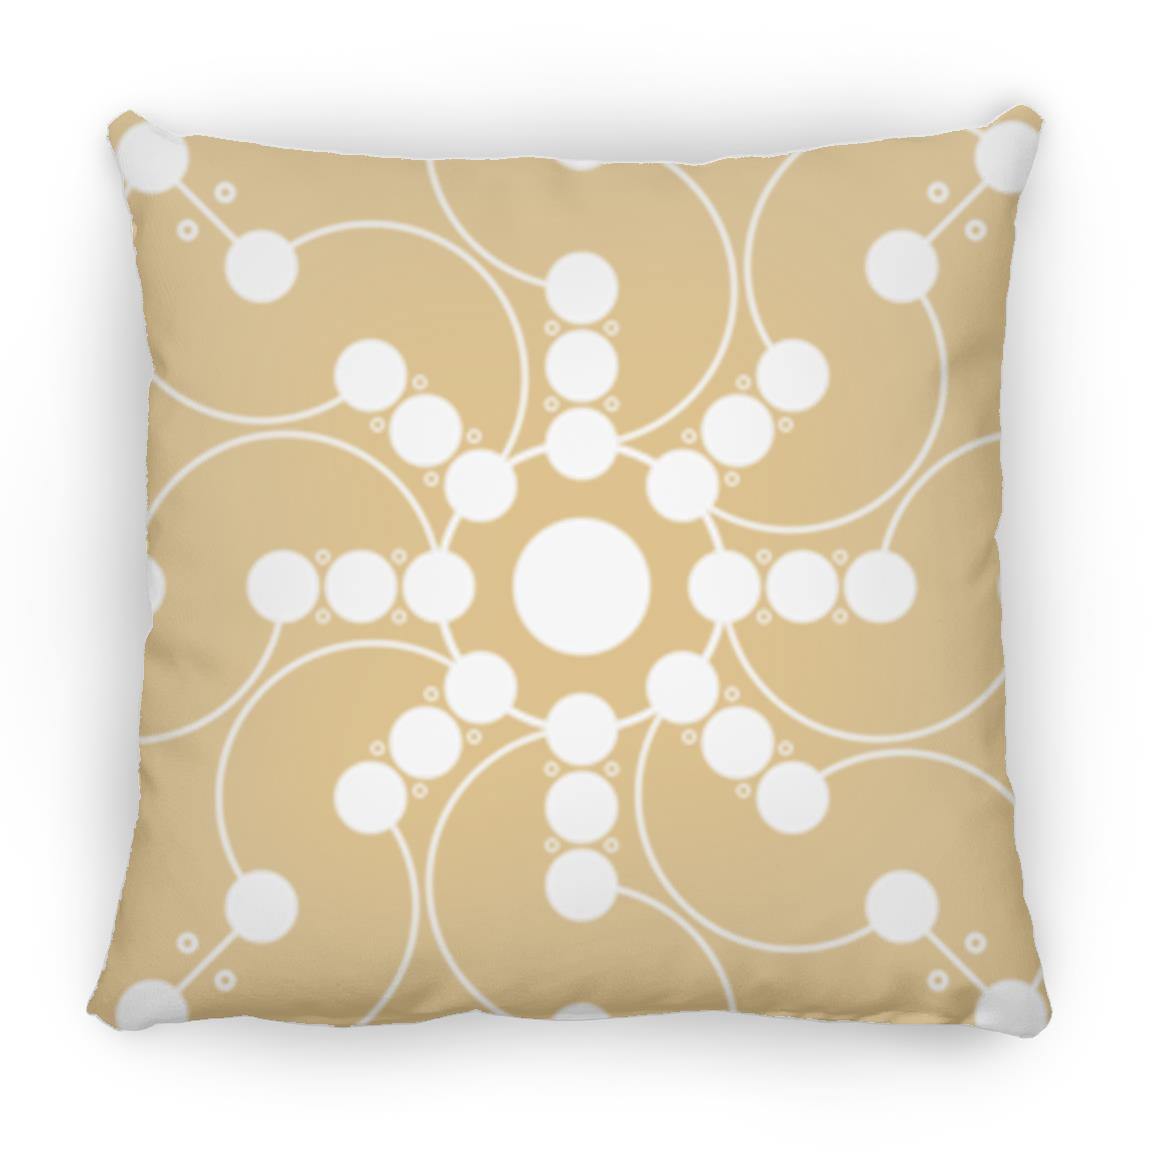 Crop Circle Pillow - Tidcombe - Shapes of Wisdom